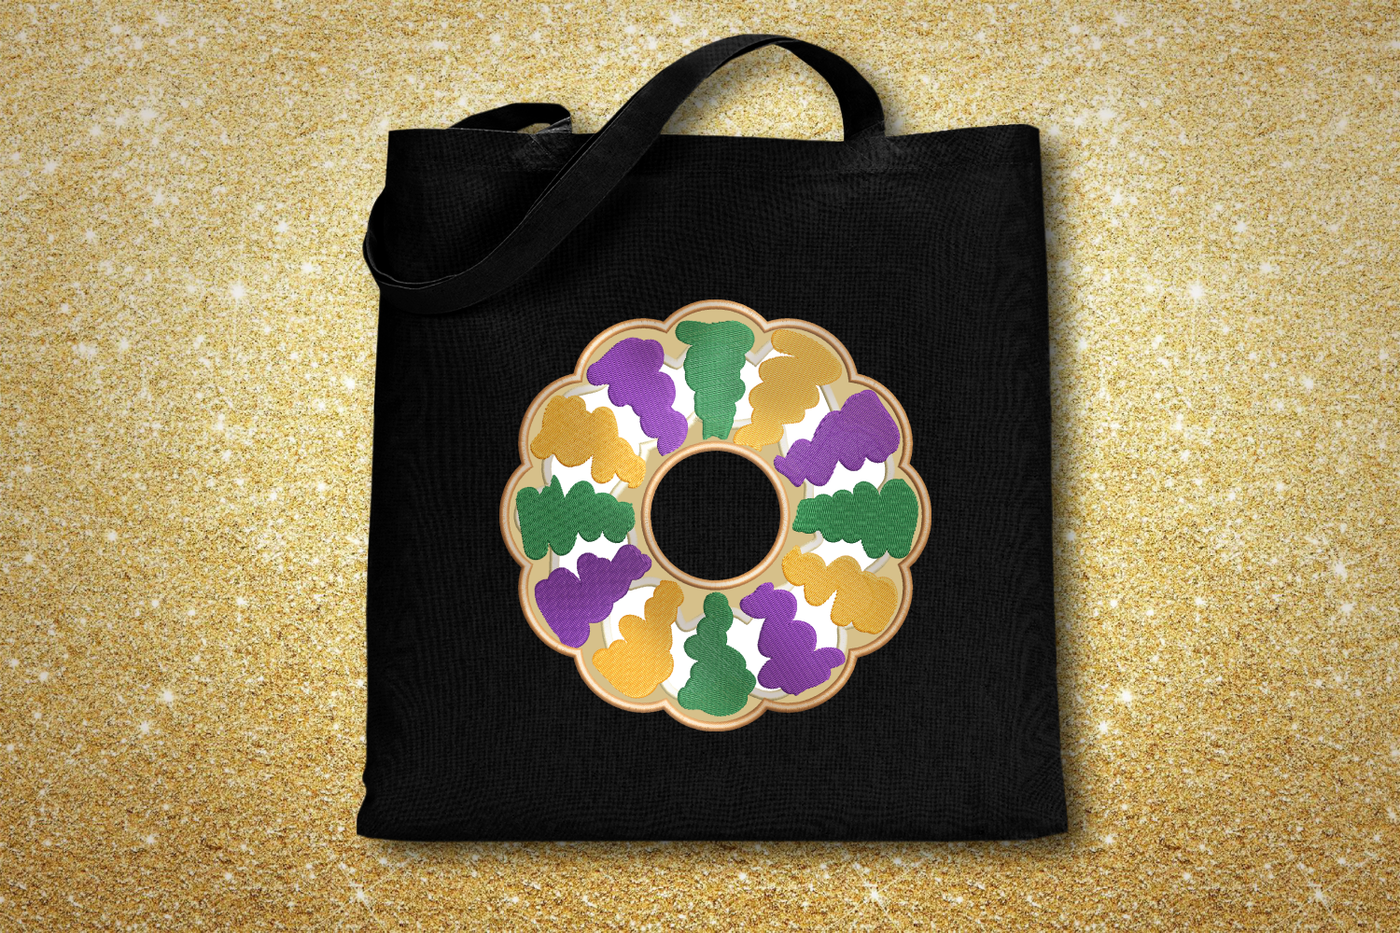 Black tote bag with an applique King Cake design